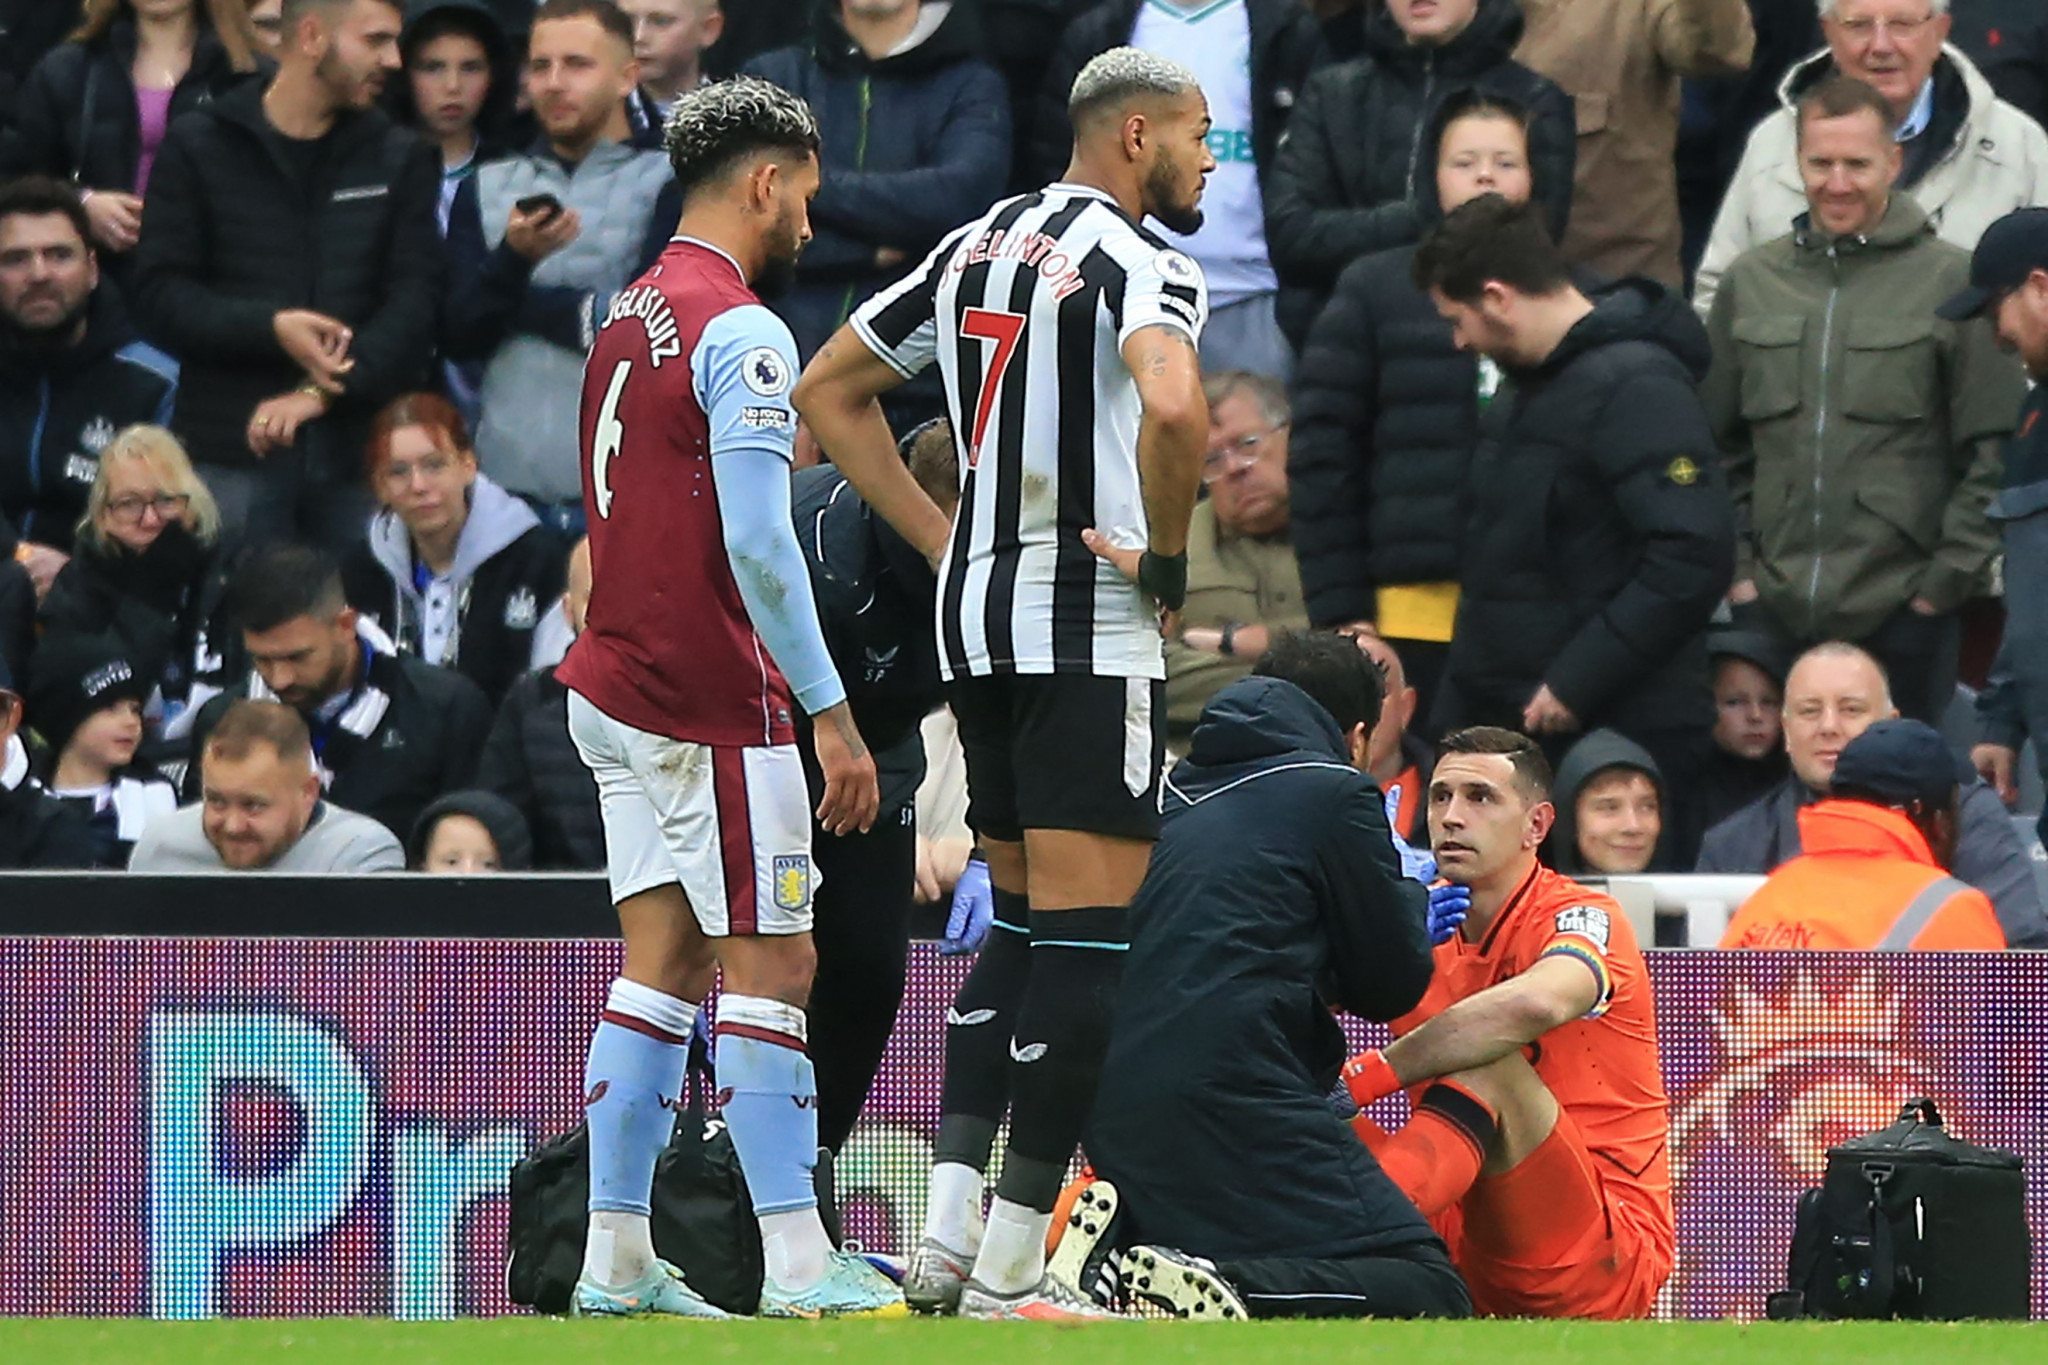 Premier League club Aston Villa received criticism after goalkeeper Emiliano Martínez, furthest right, was initially allowed to continue after taking a blow to the head in a recent match ©Getty Images